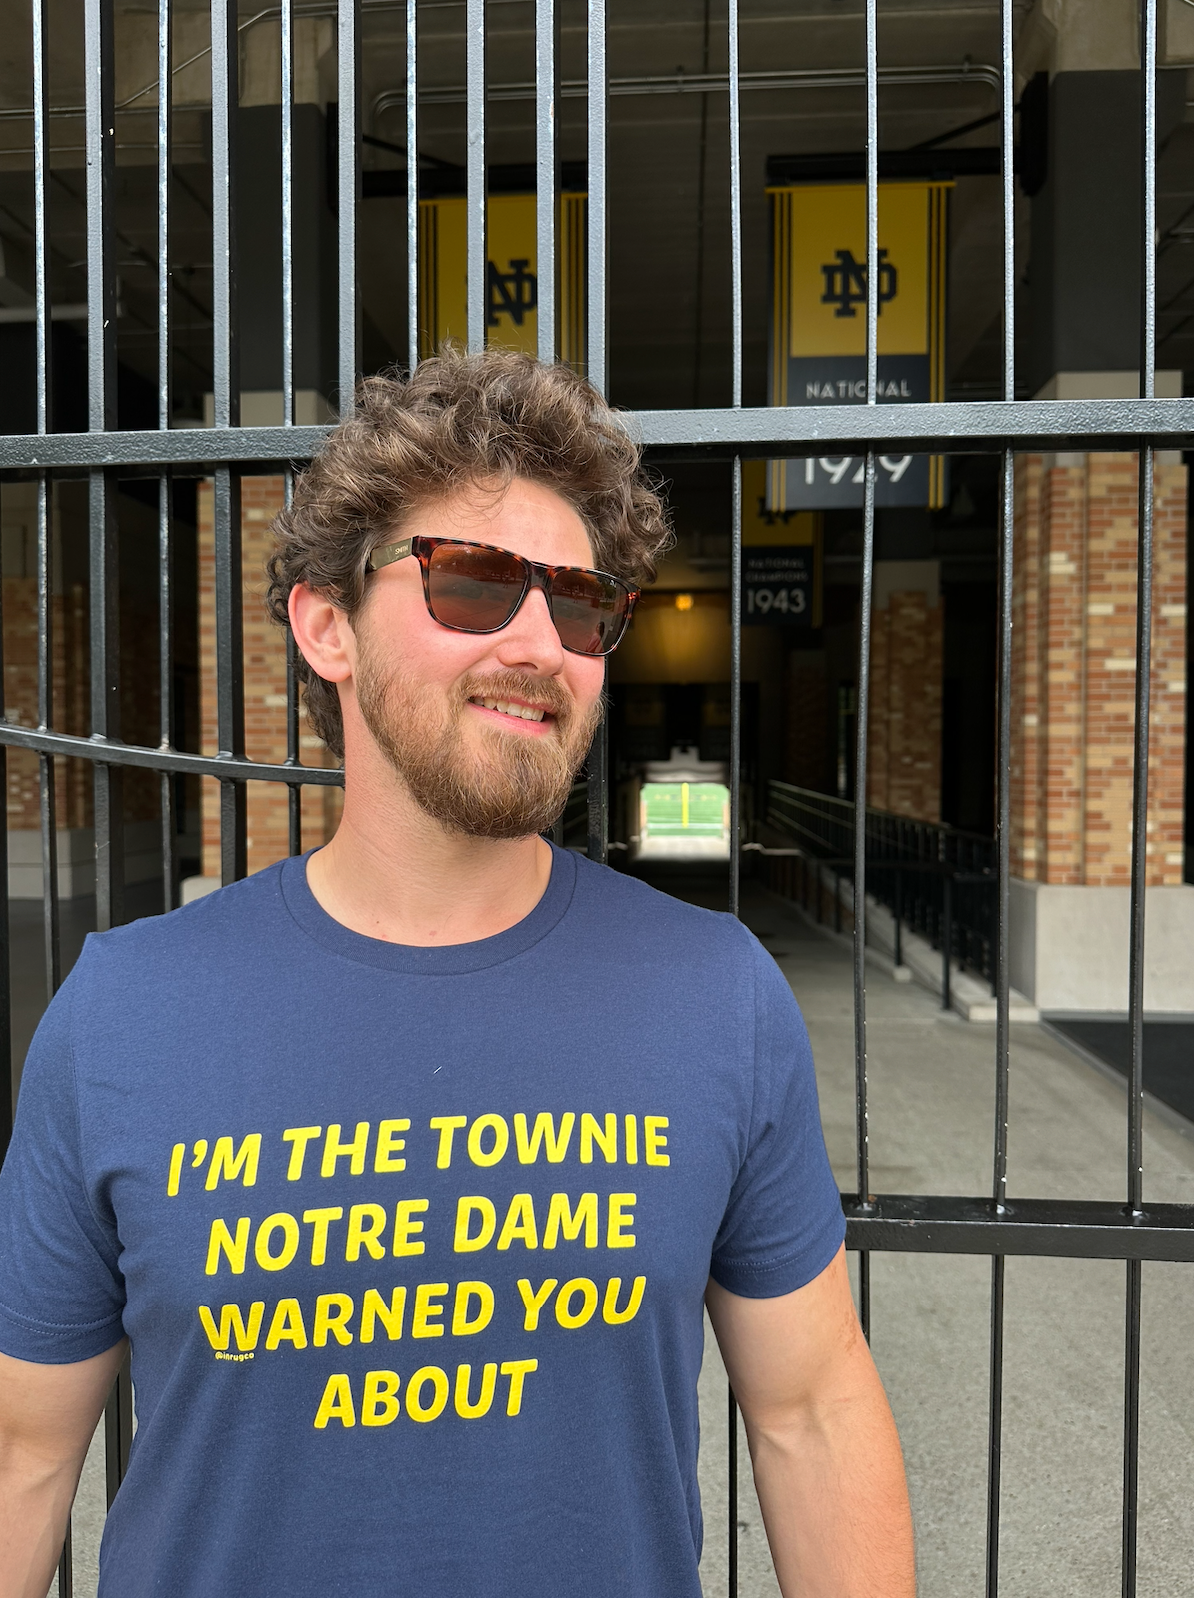 I'm the townie nd warned you about shirt